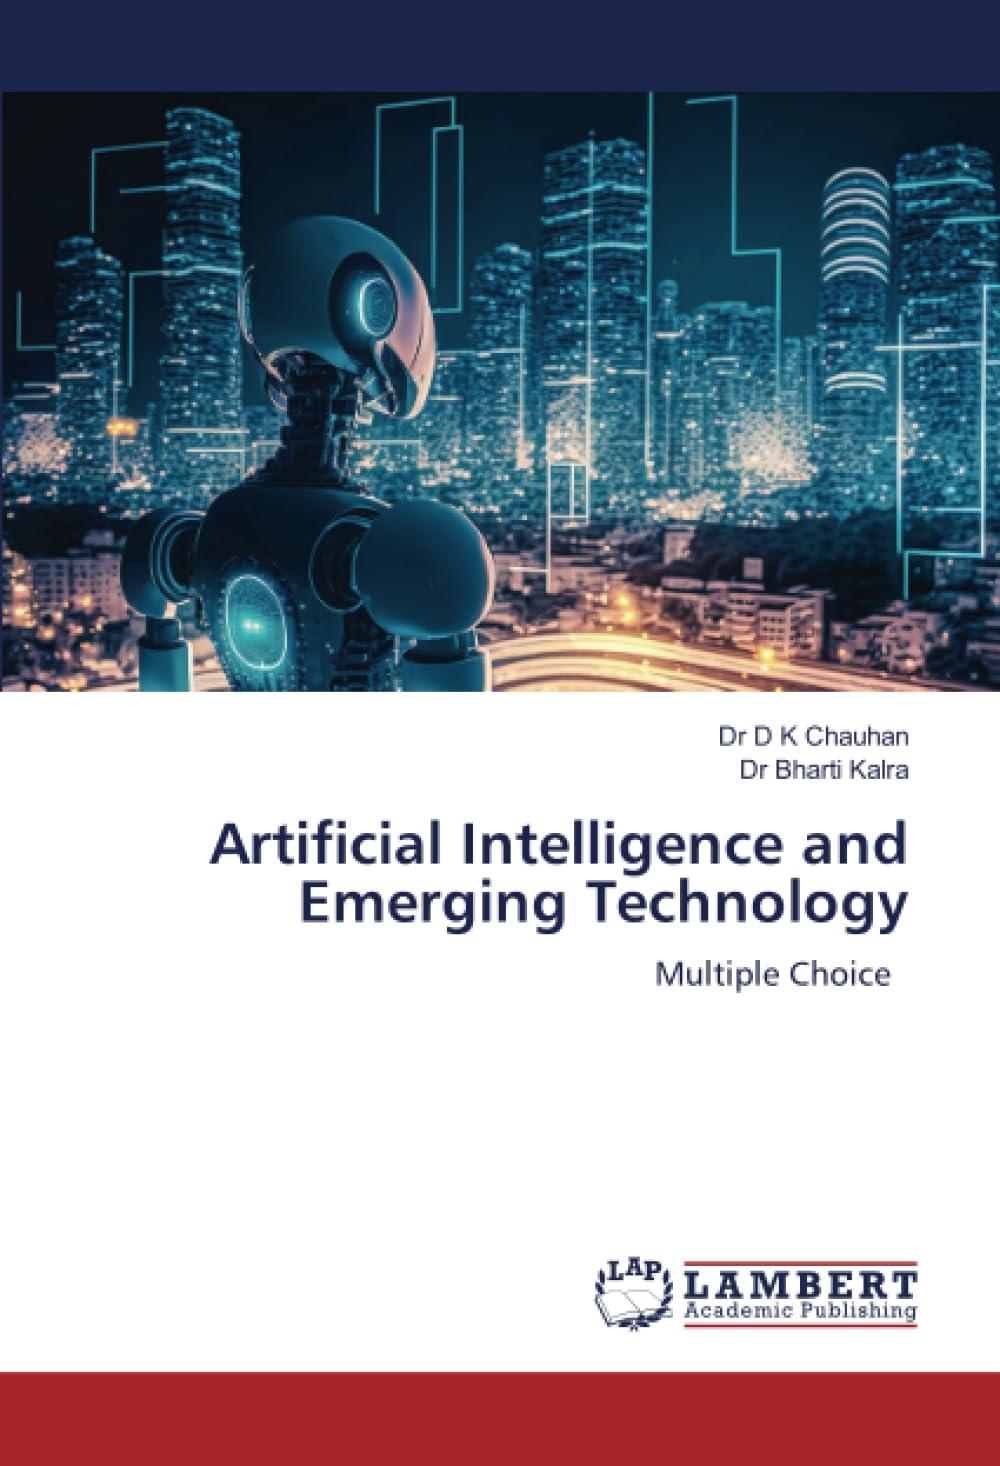 artificial intelligence and emerging technology 1st edition dr d k chauhan , dr bharti kalra 6206753409,